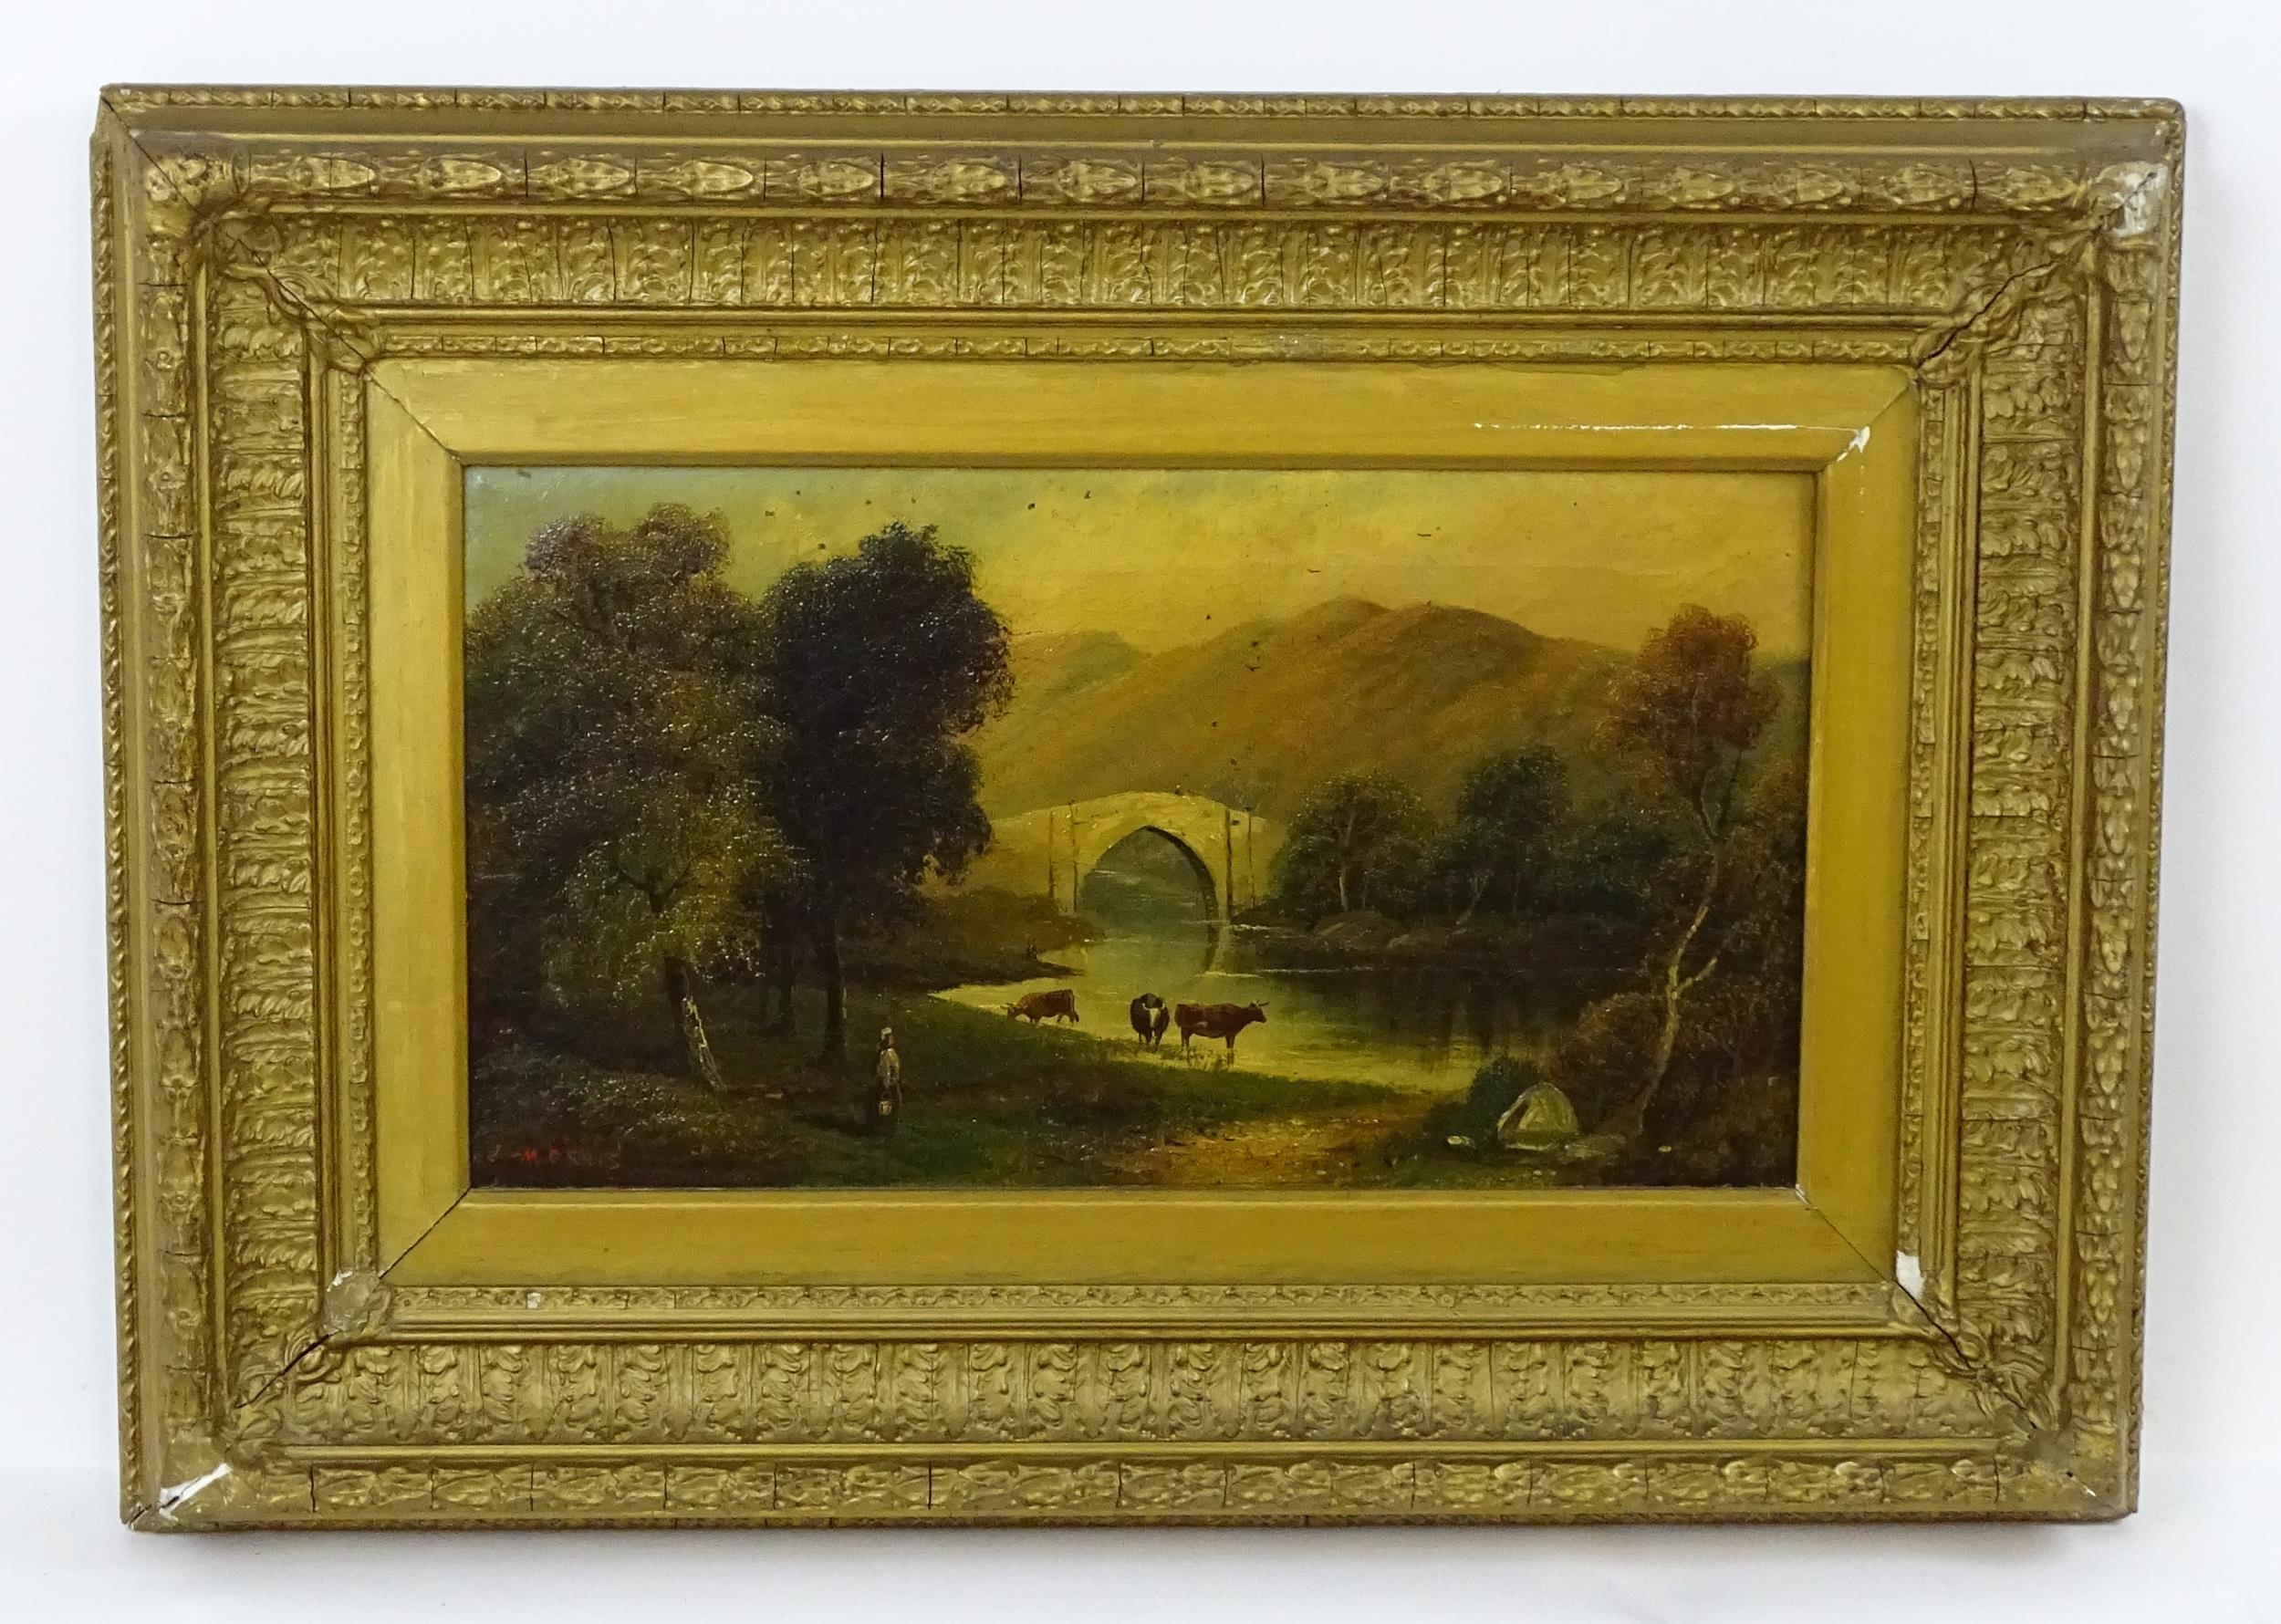 J. Morris, 19th century, Oil on canvas, A Highland wooded river landscape with cattle watering.